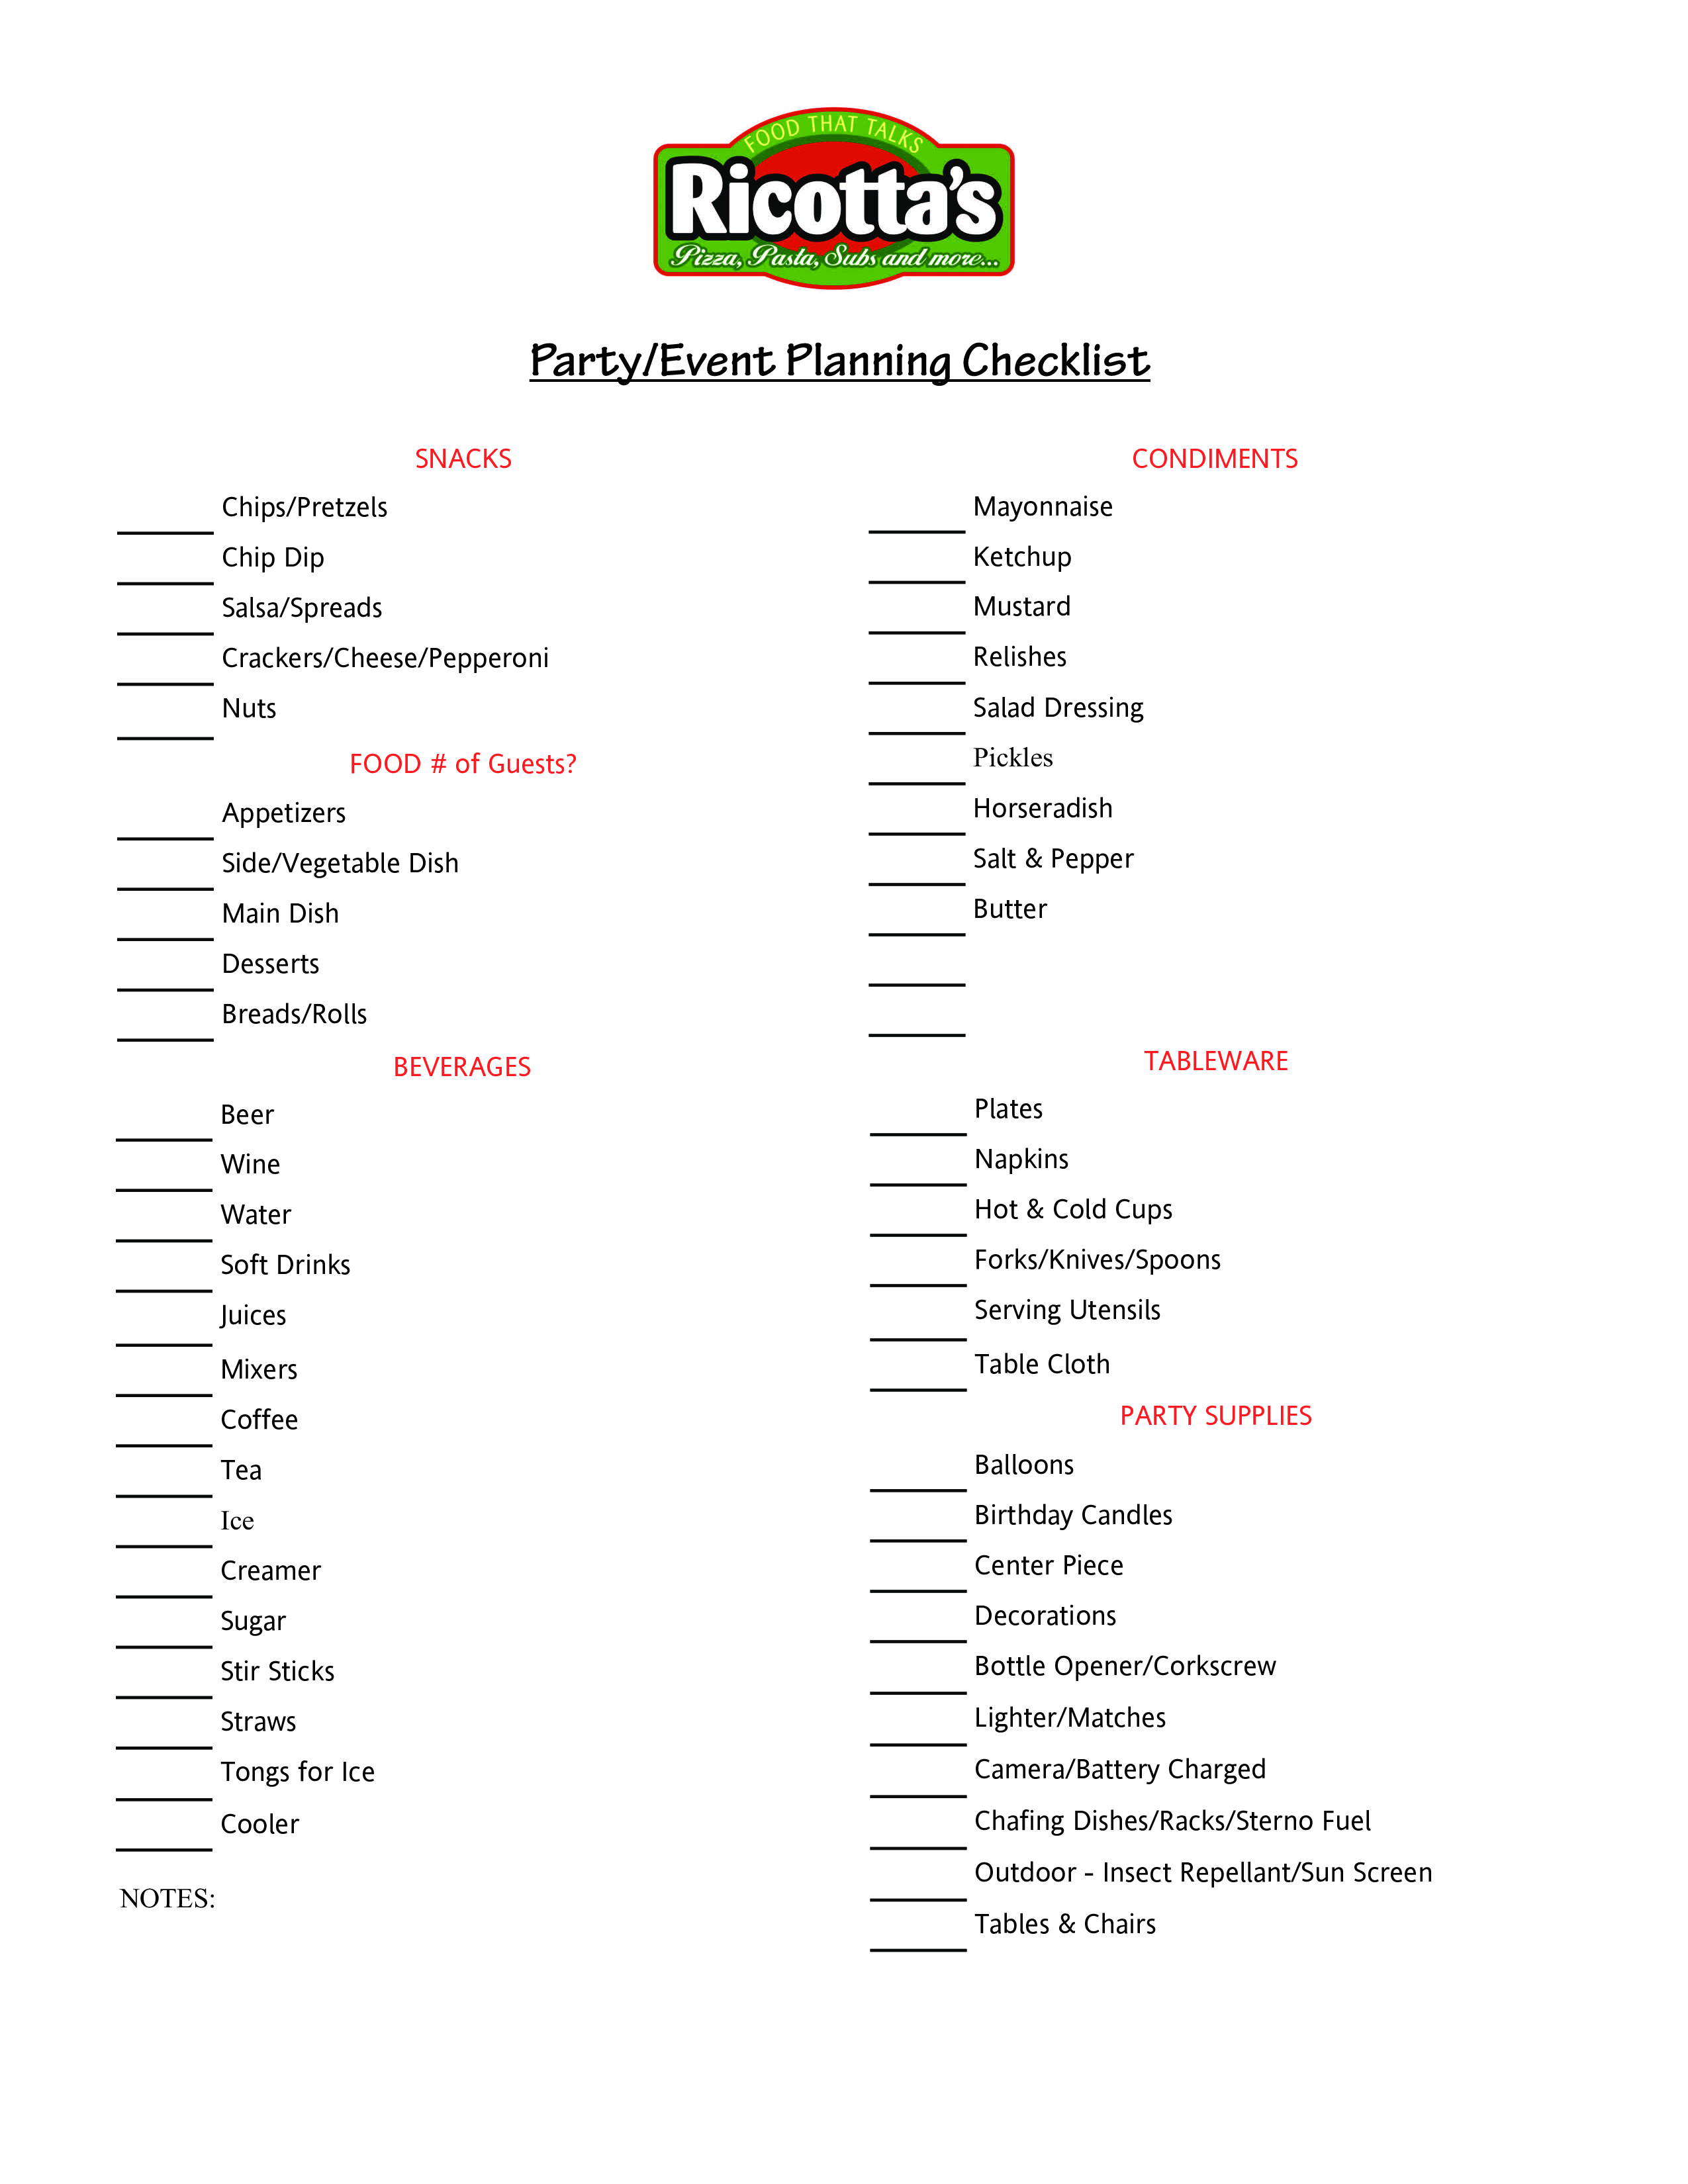 Party Event Planning Checklist main image